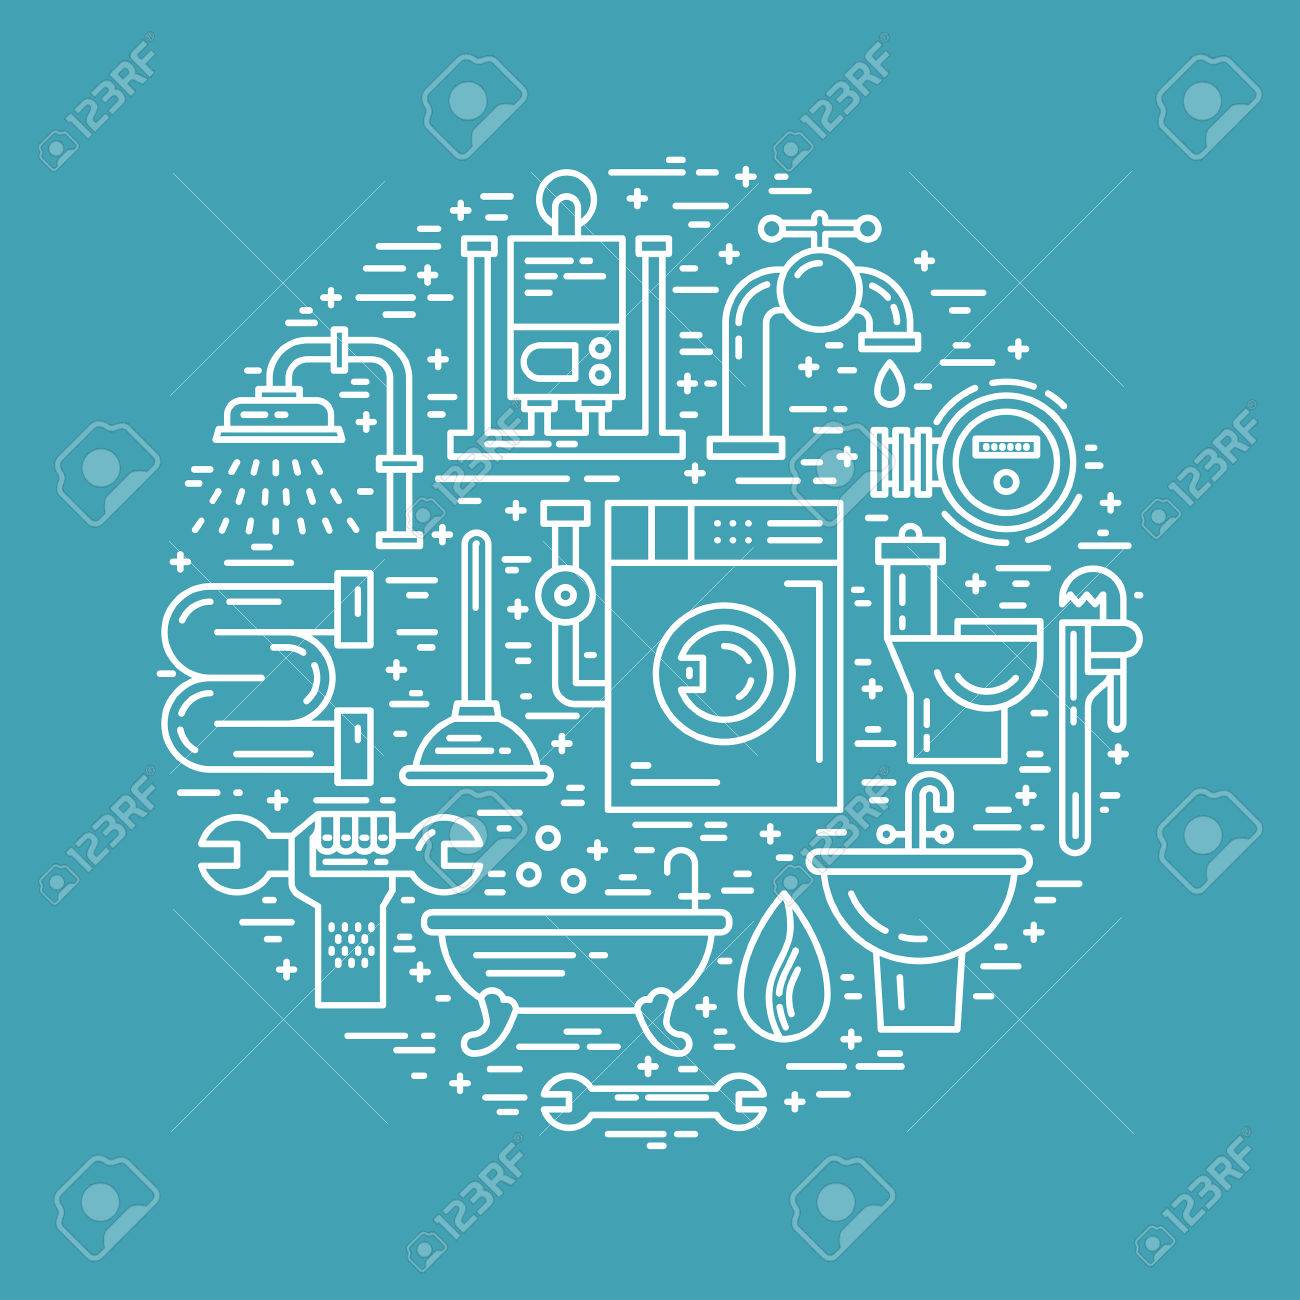 Conceptual Illustration With Different Plumbing Symbols Isolated